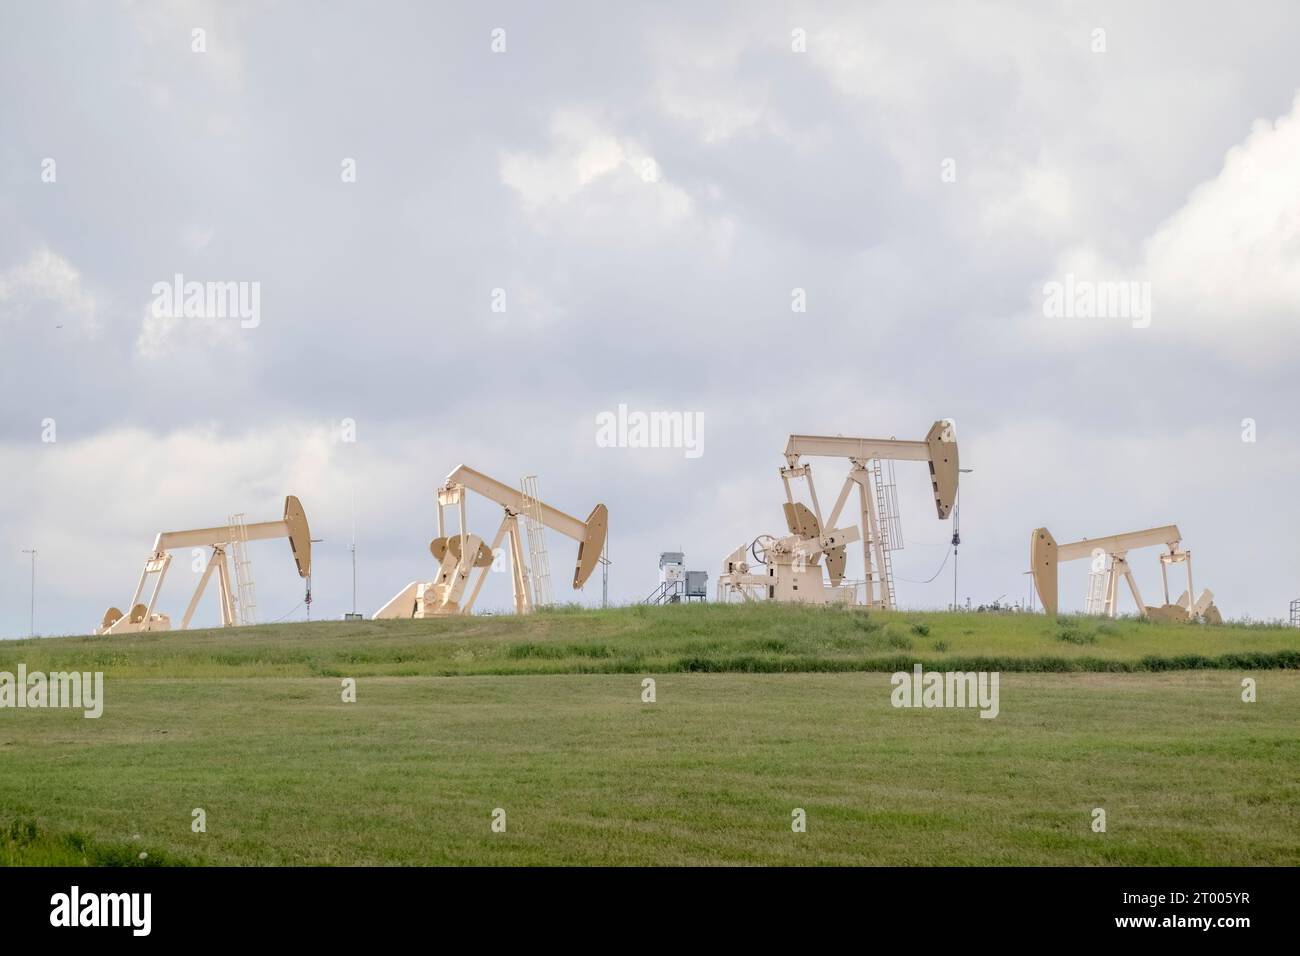 Several crude oil production wells, a site with pump jacks in a rural area during summer in Alberta Canada. Concept: Oil and gas Stock Photo